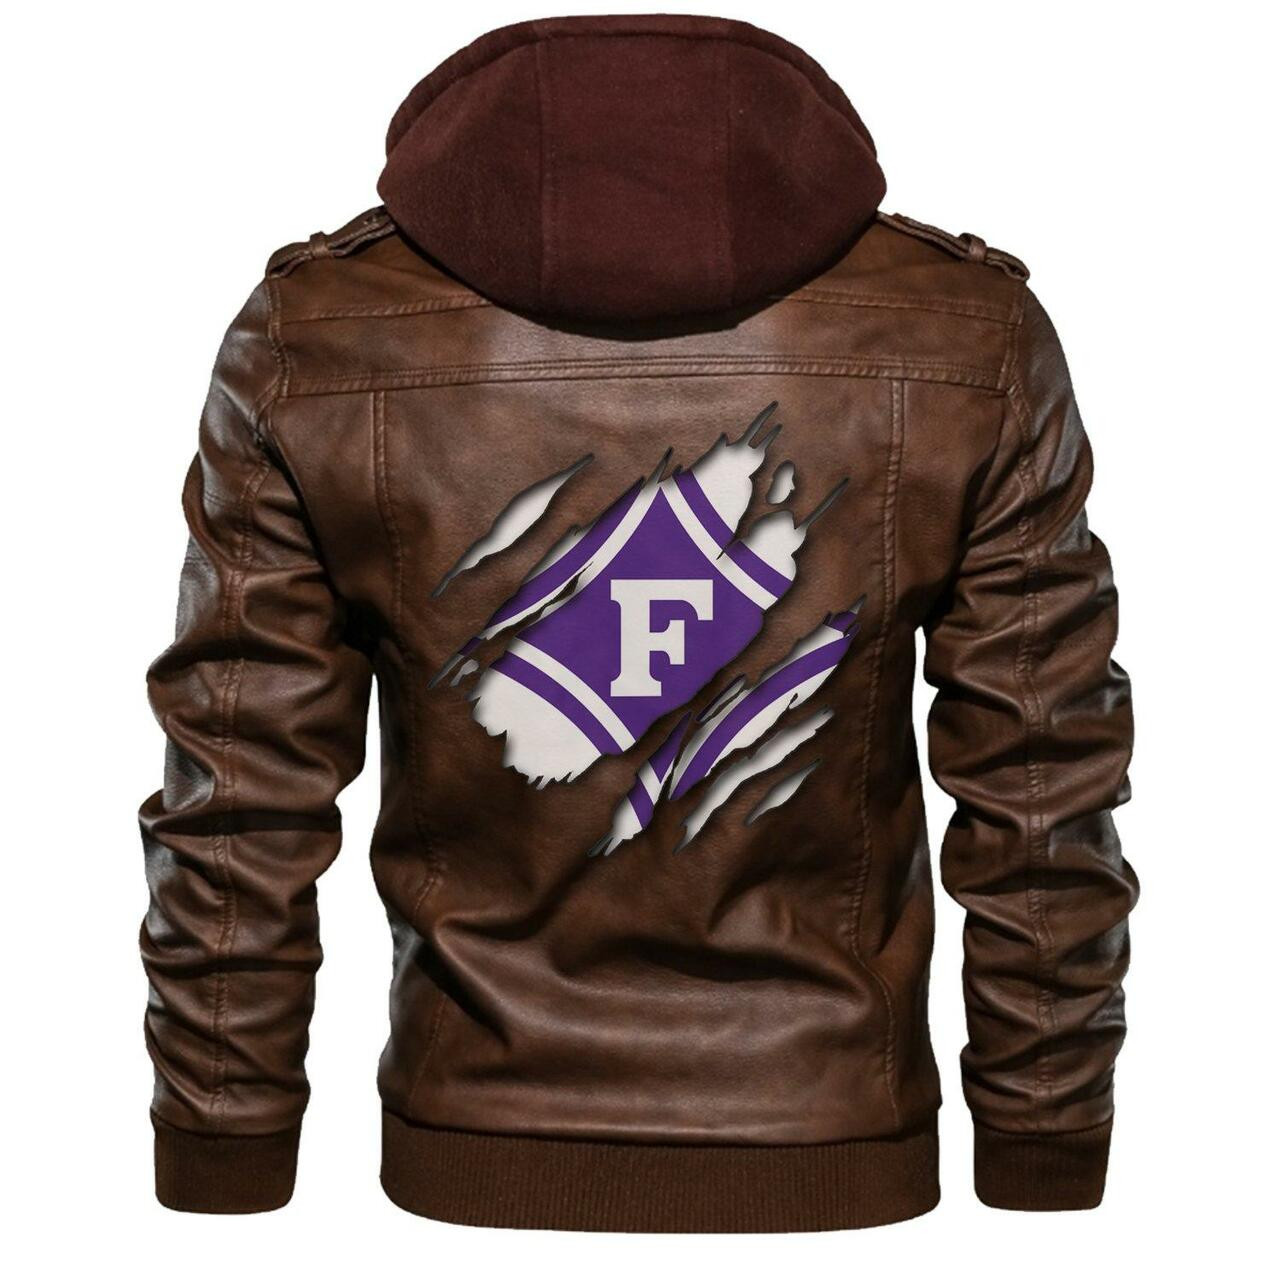 Nice leather jacket For you 201